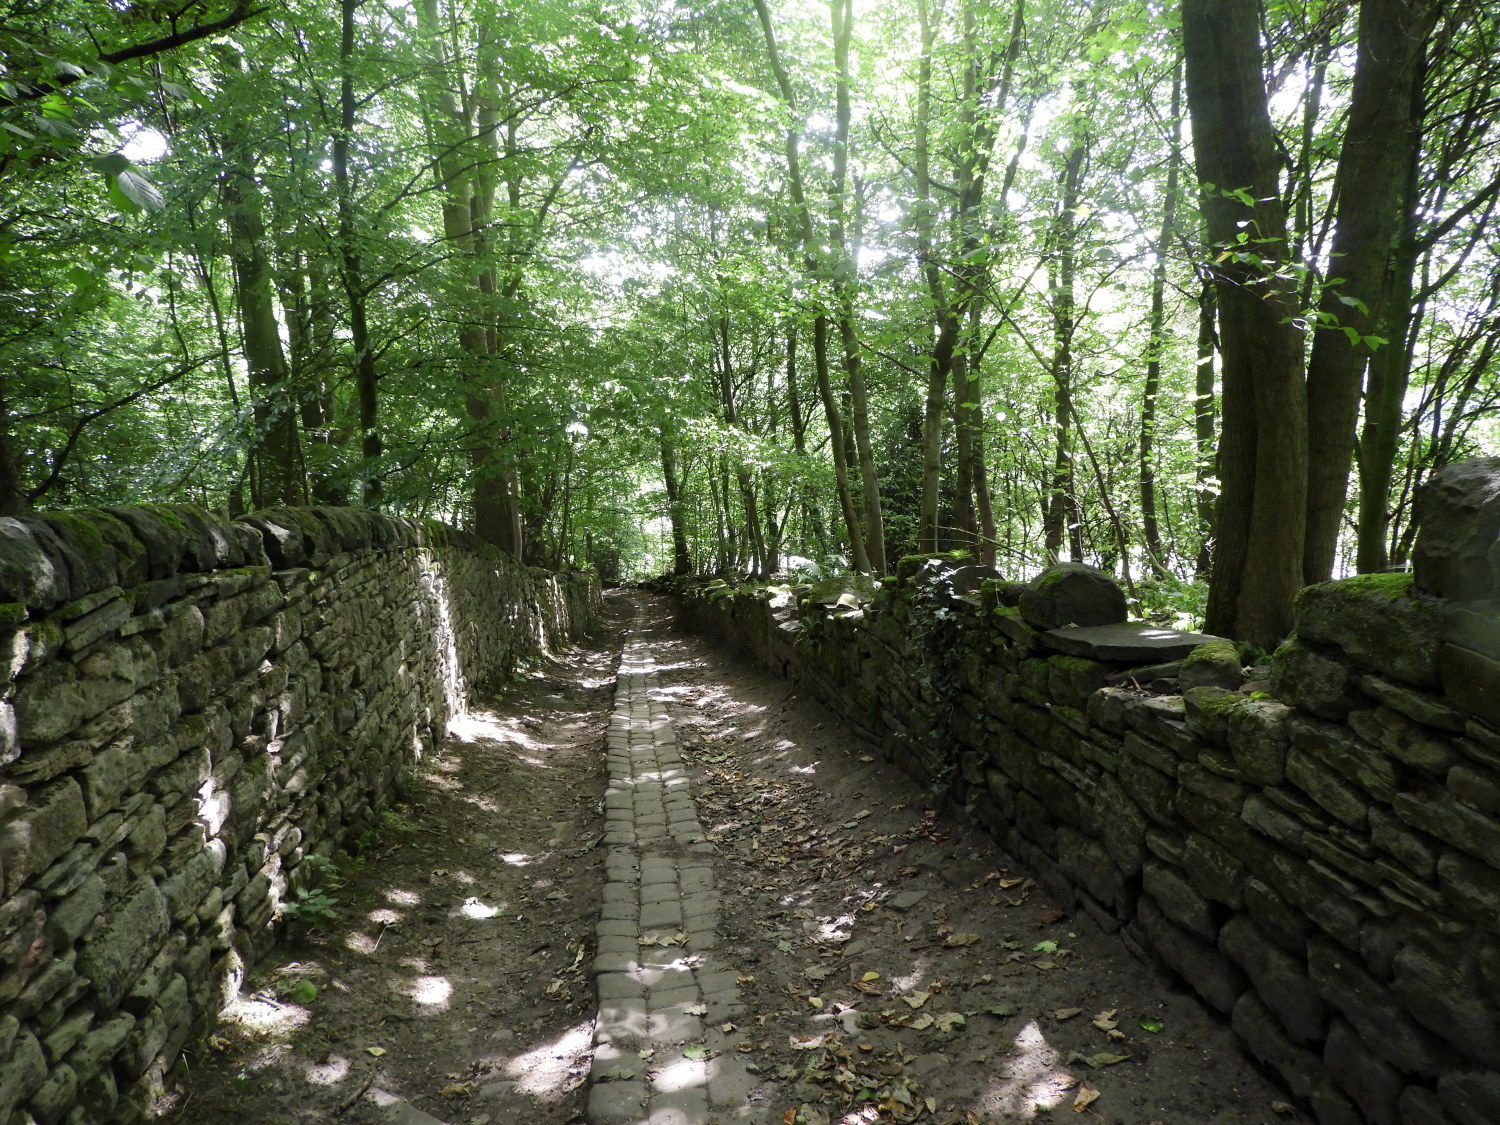 The path leading up to Shipley Glen